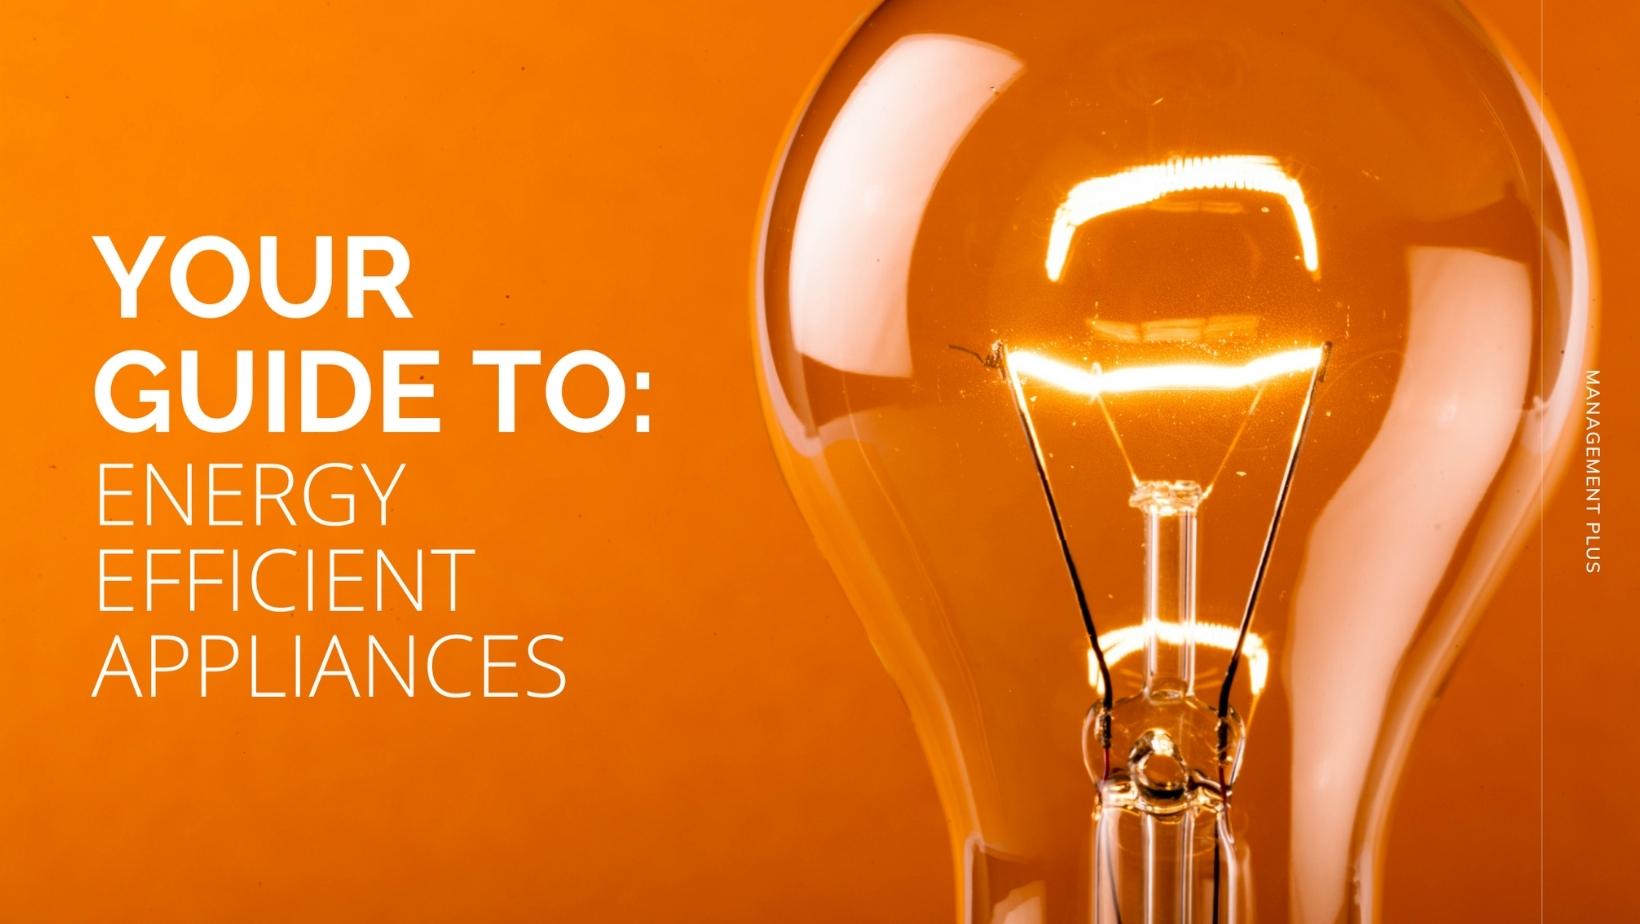 A lightbulb on an orange background. Text reads "Your guide to energy efficient appliances."